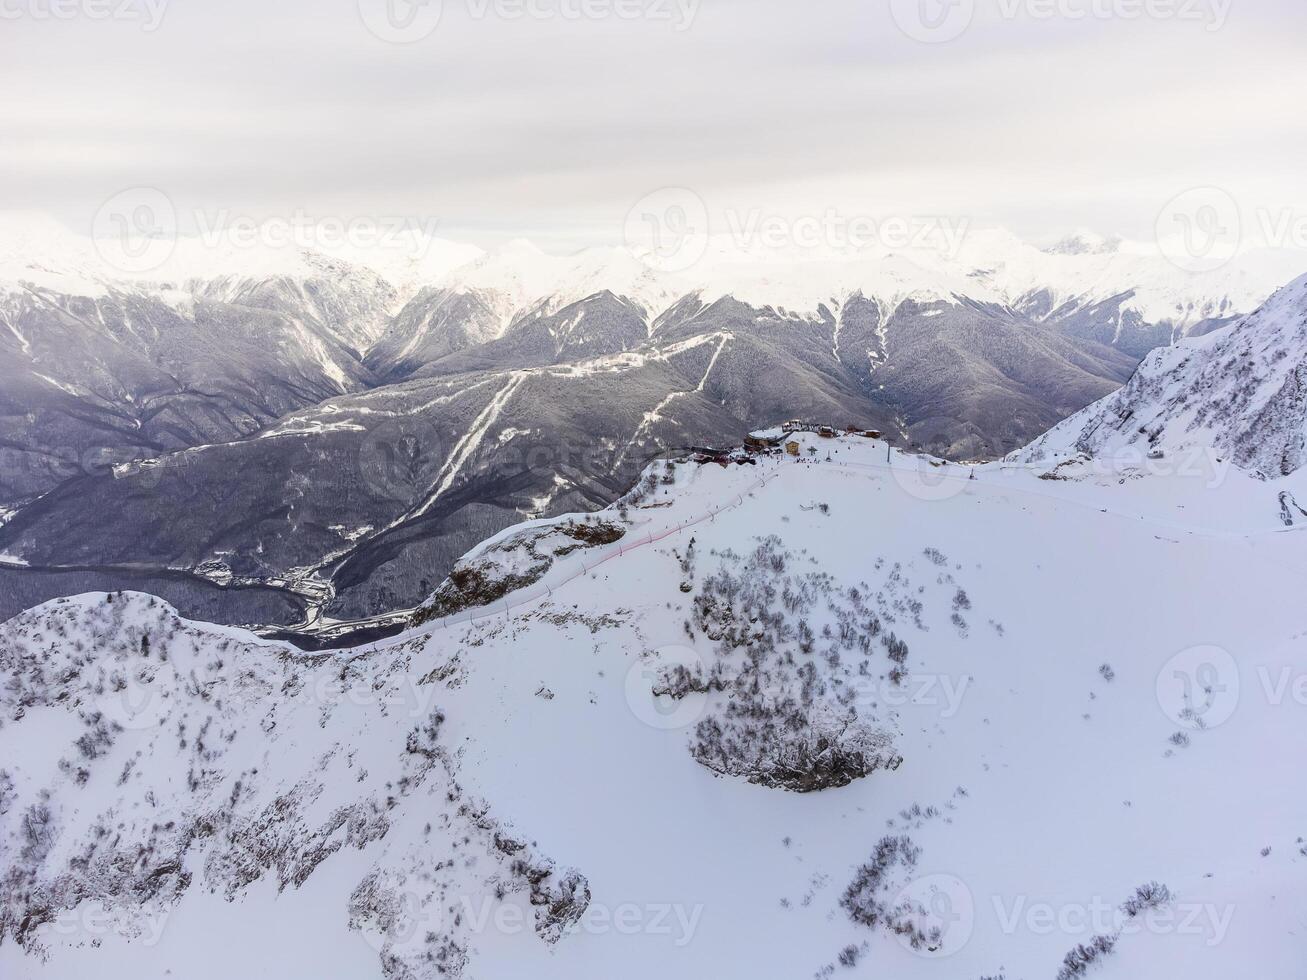 A view of the Krasnaya Polyana ski resort and the snowy mountain landscapes photo